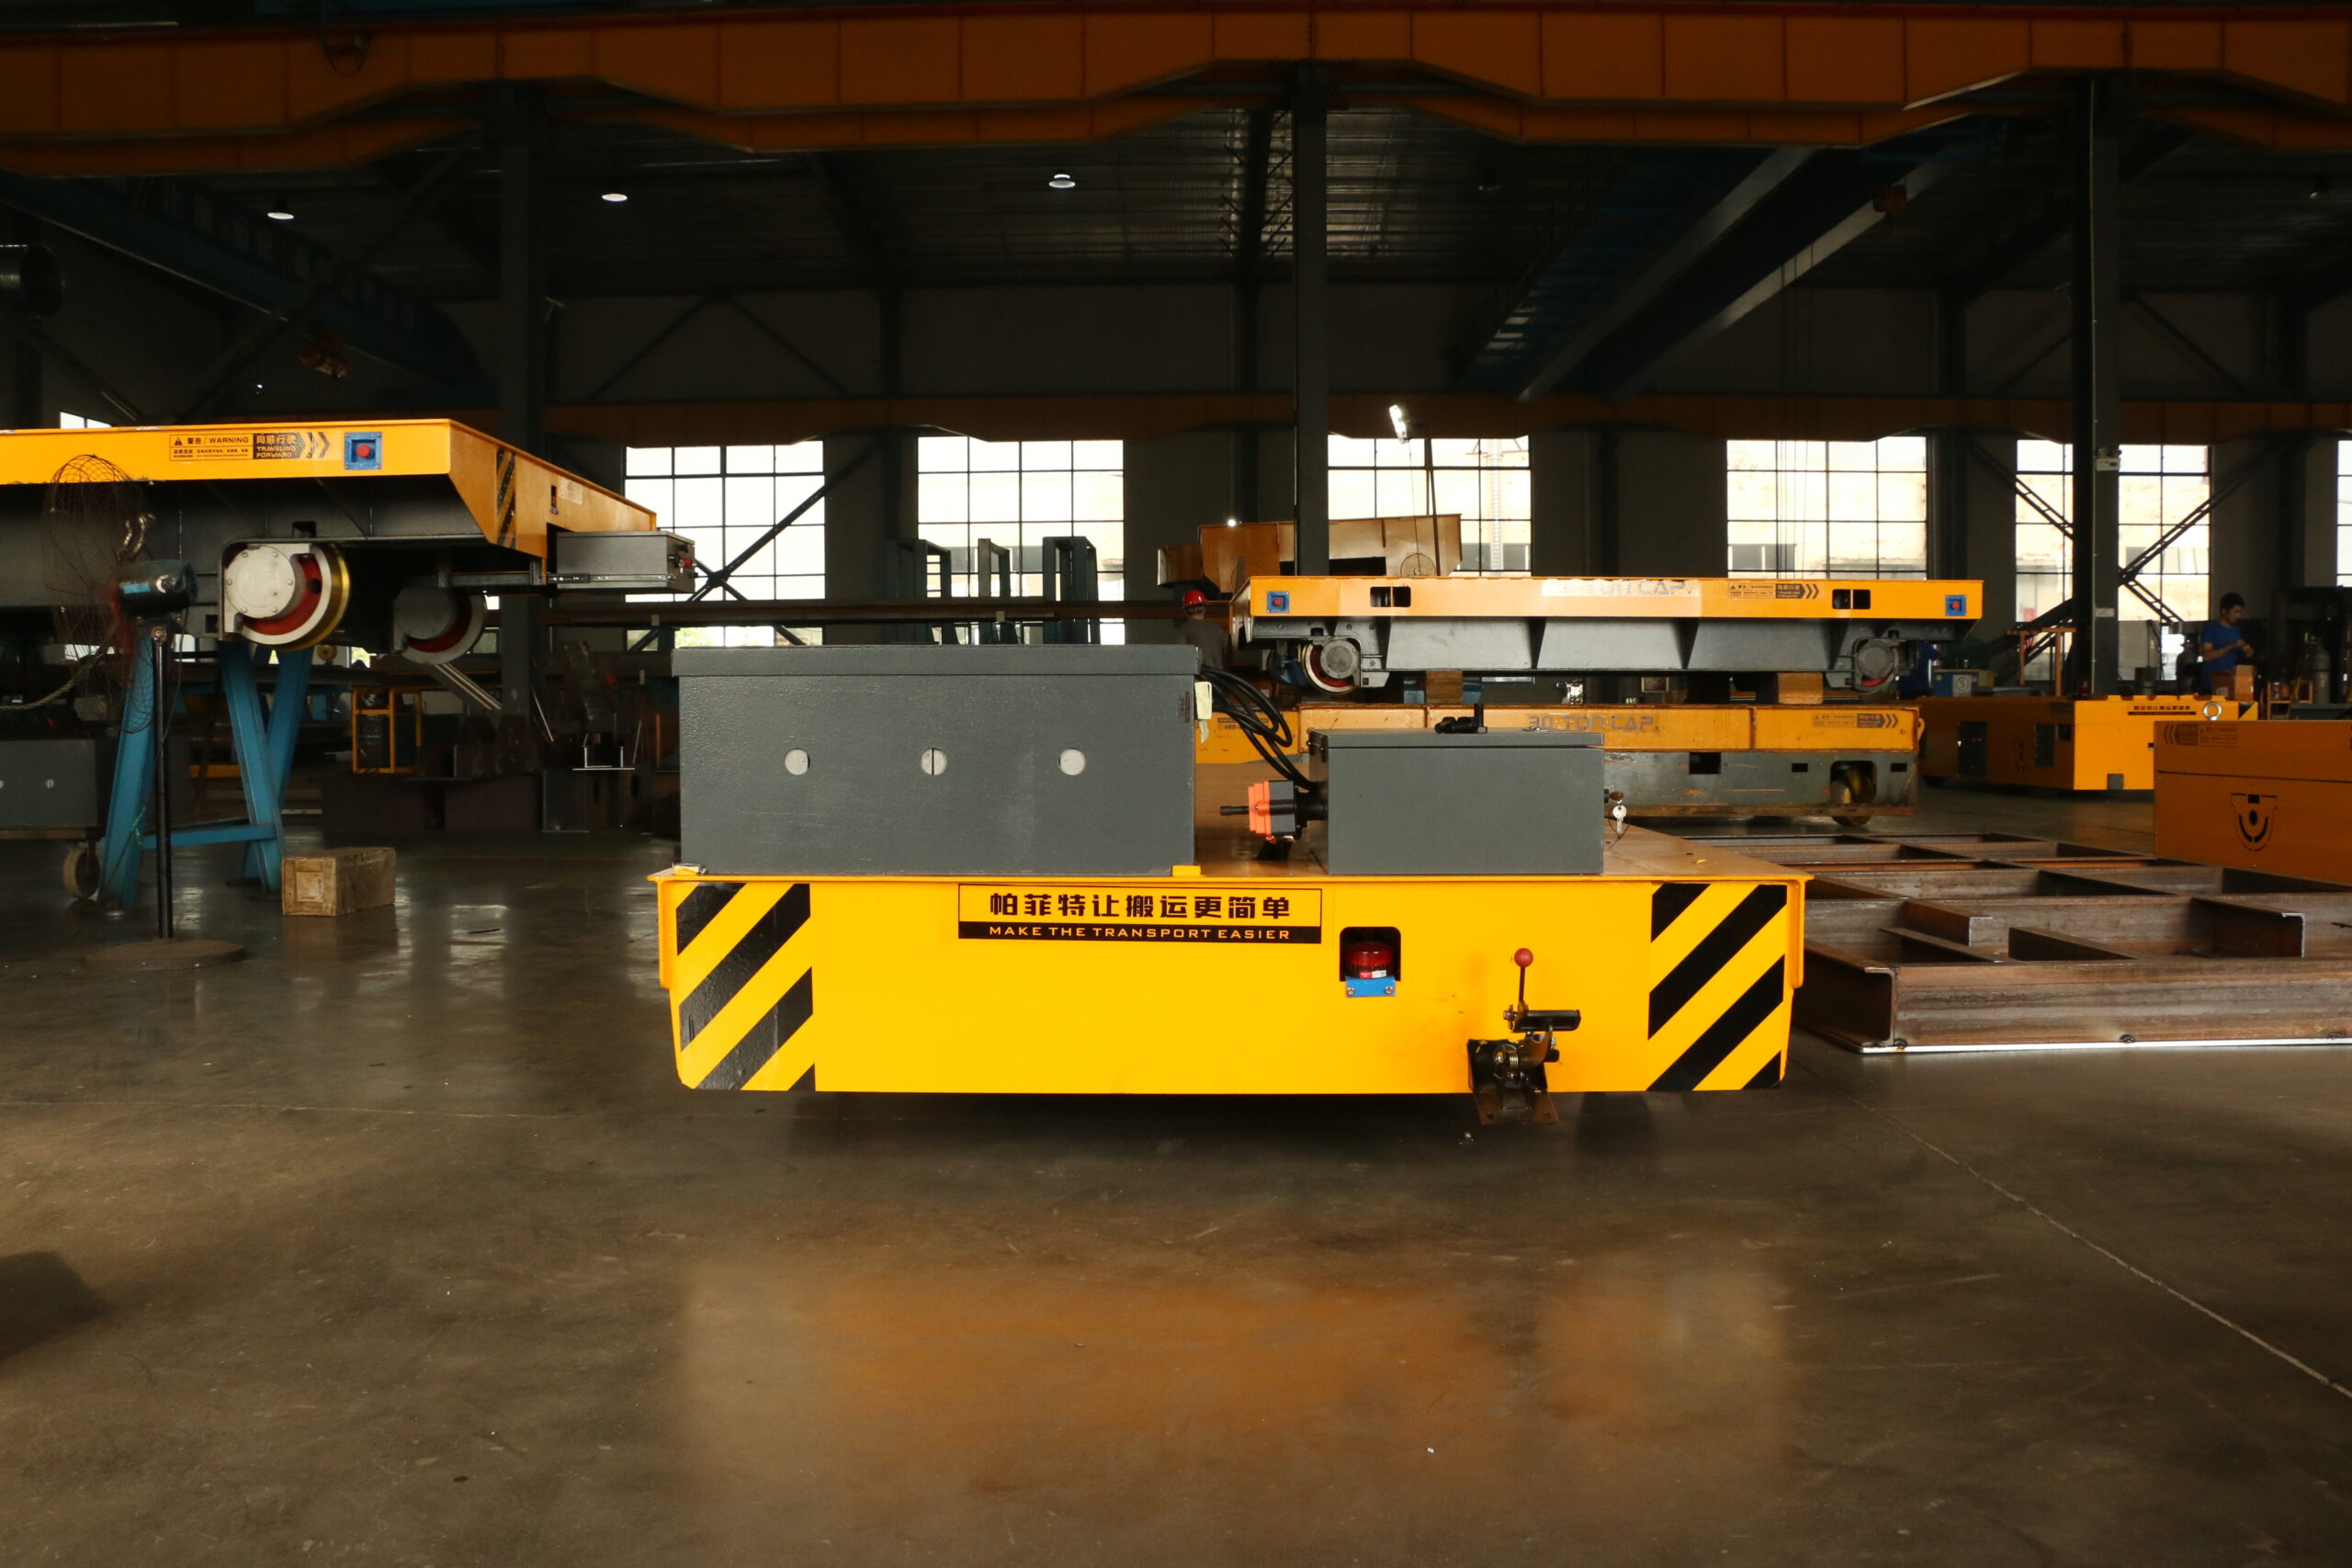 Rail transfer vehicle for tunnel transportation of materials